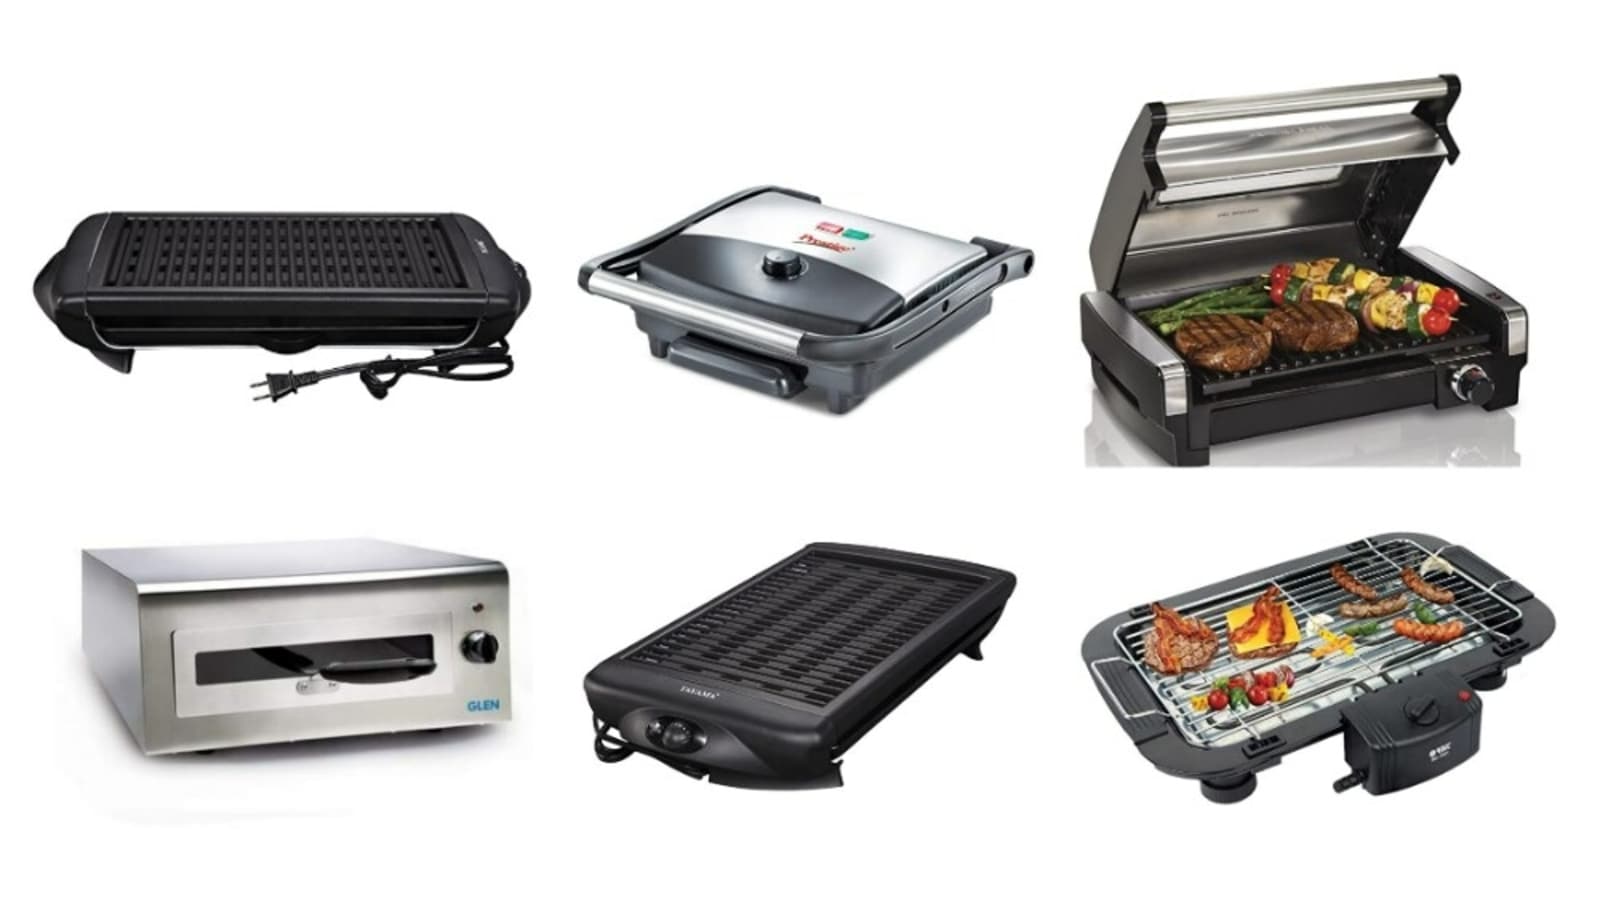 DK HOME APPLIANCES  Barbeque grill, Electric barbecue grill, Cooking on  the grill